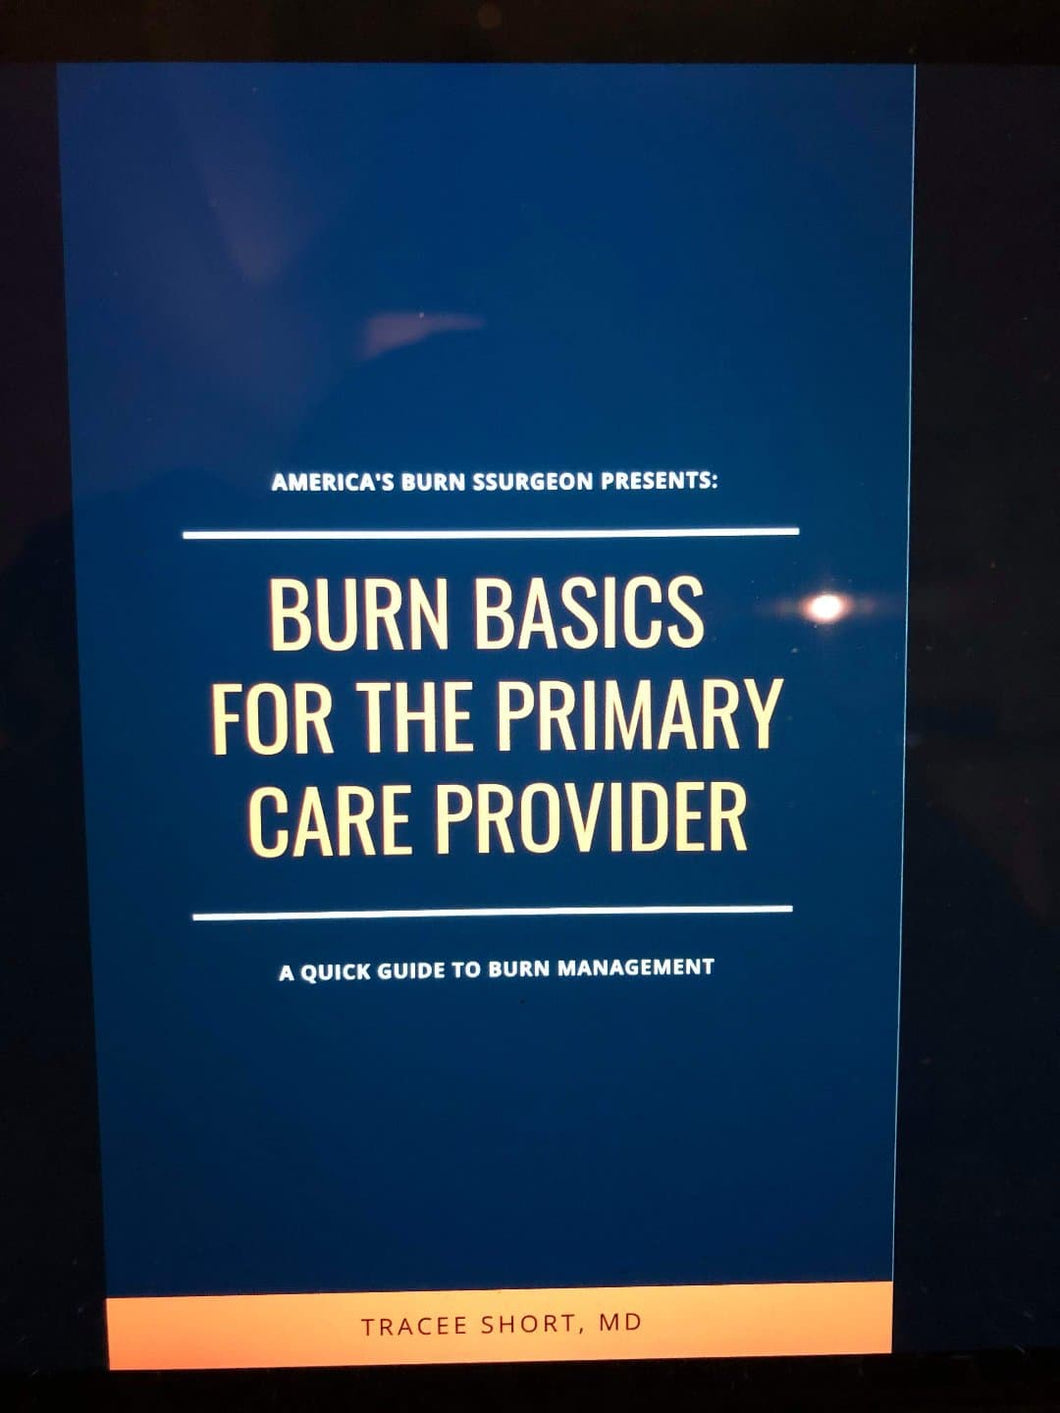 Burn Basics for the Primary Care Provider (an E-book) by America's Burn Surgeon, Dr. Tracee